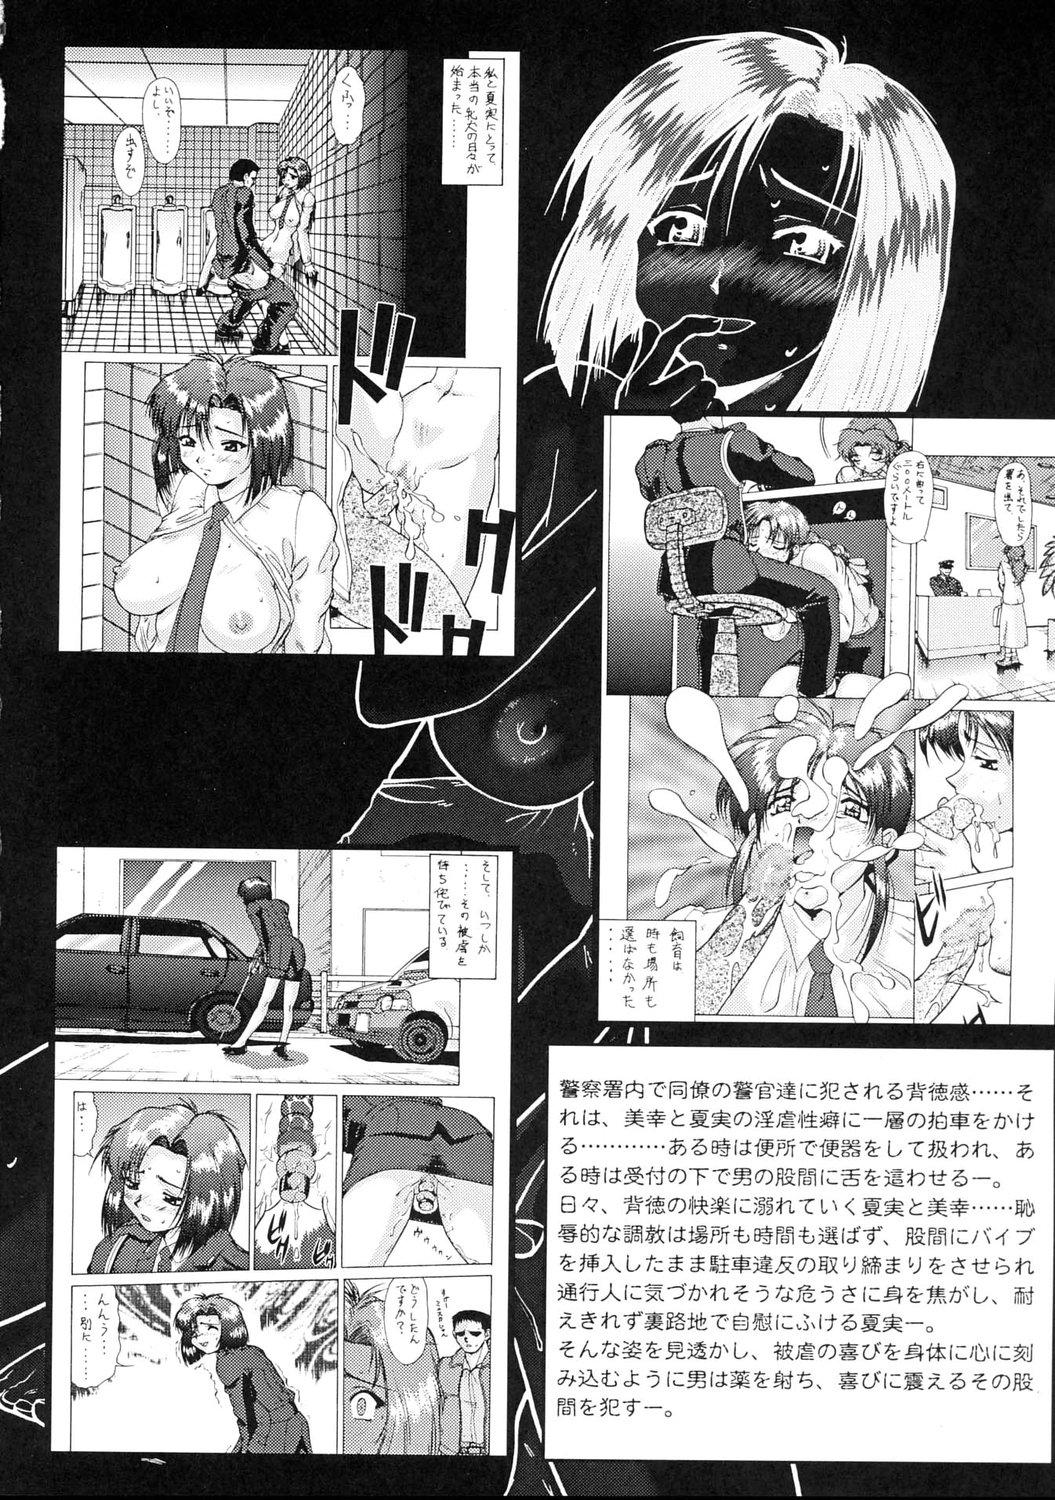 Hot Blow Jobs Taiho Shichauzo The Doujin Vol. 5 - Youre under arrest Female Orgasm - Page 9